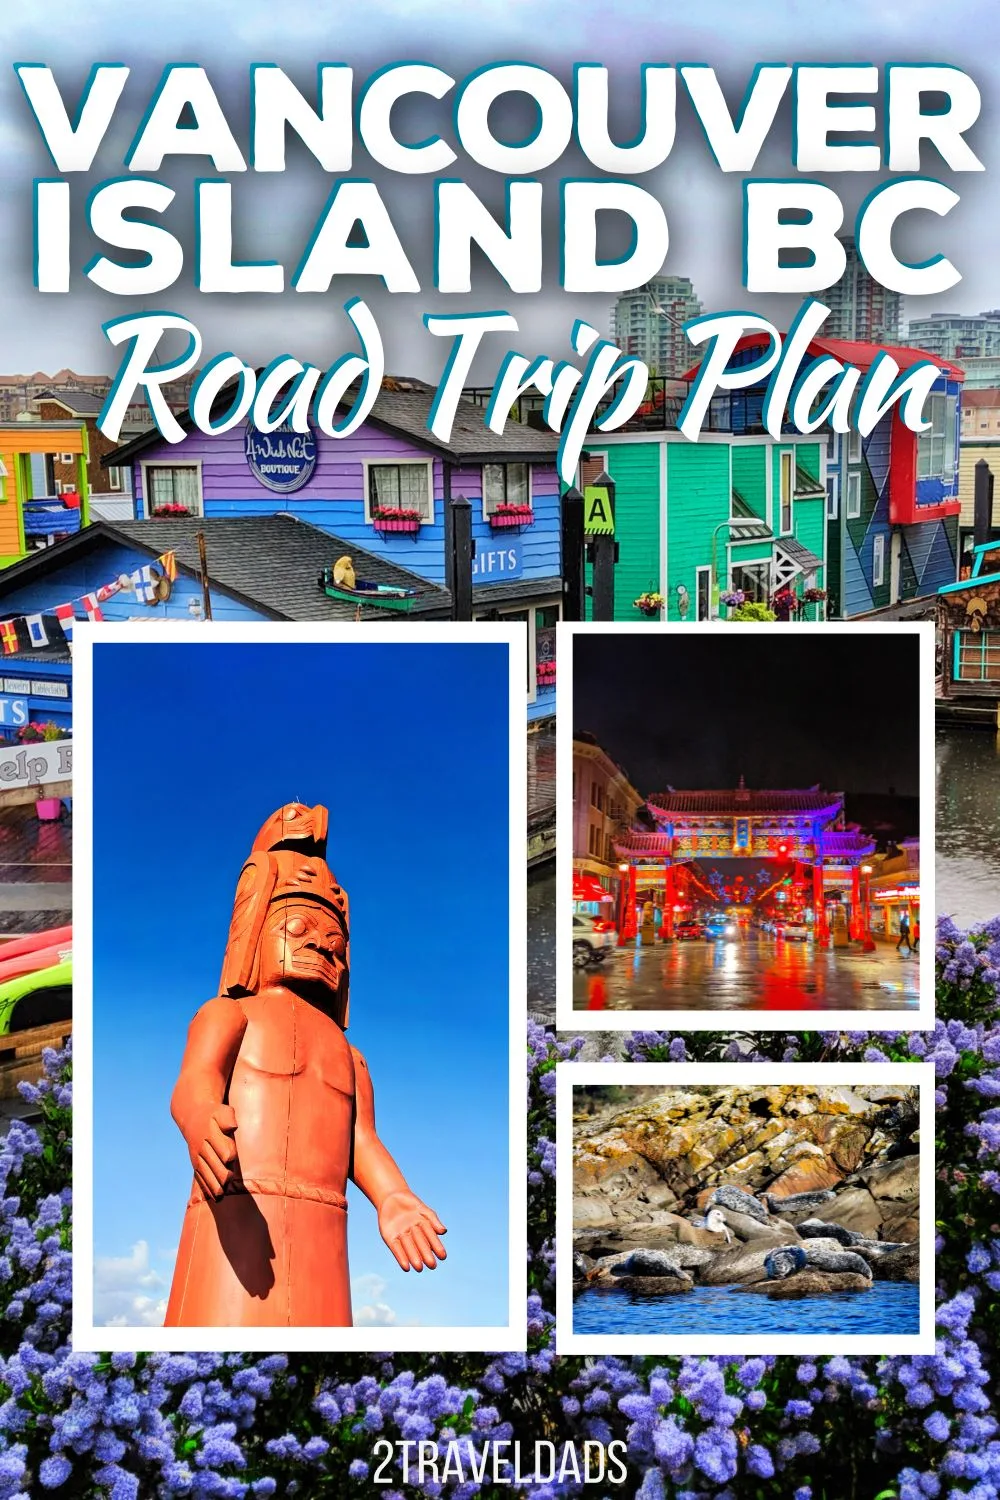 The Vancouver Island road trip is a quintessential Pacific Northwest experience. From Victoria BC to Tofino and the Strait of Georgia, we've got a road trip plan that's amazing for a week on Vancouver Island.